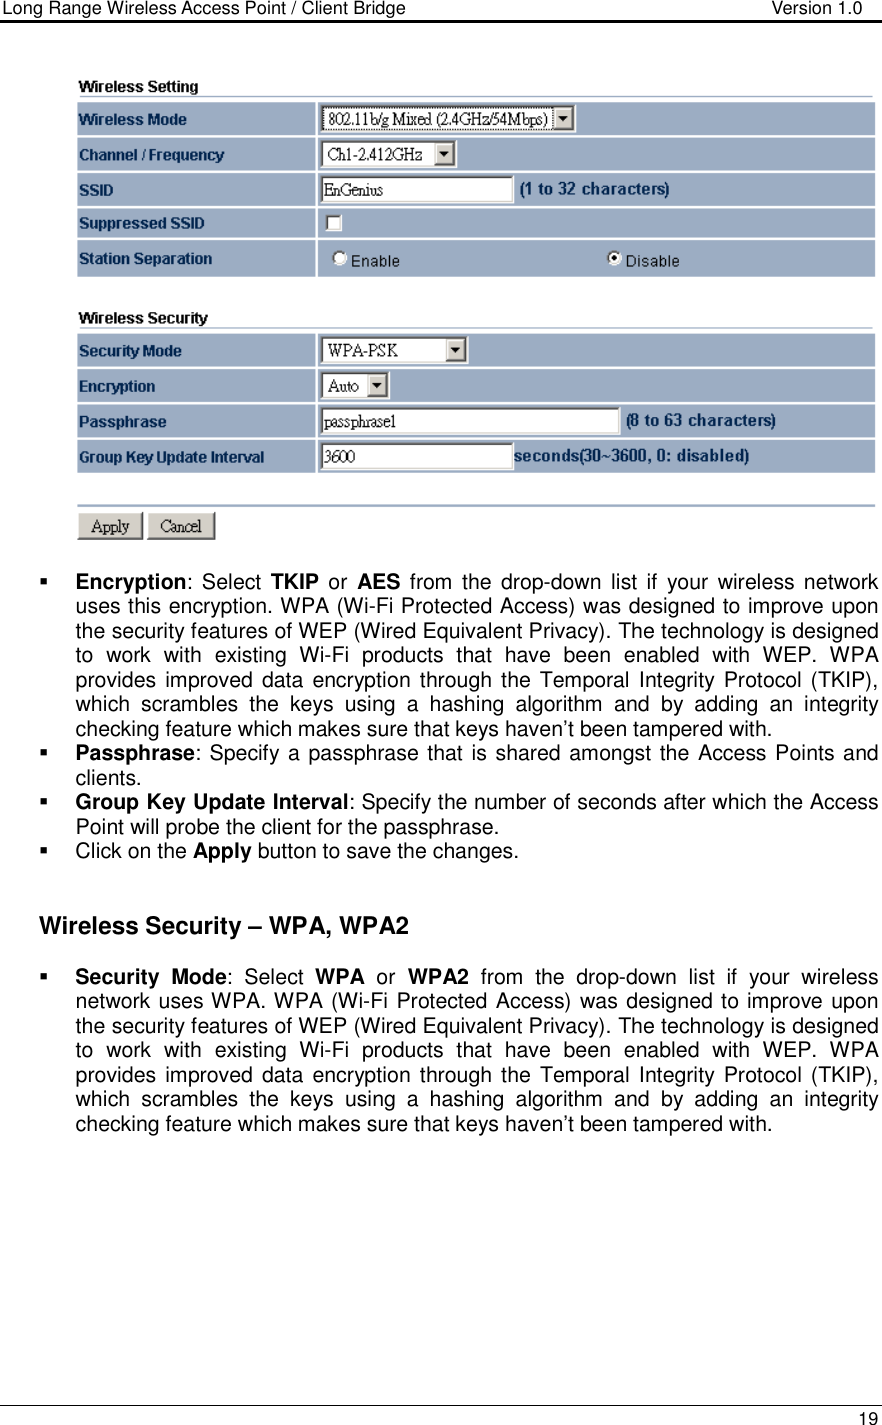 Long Range Wireless Access Point / Client Bridge                                   Version 1.0    19     Encryption:  Select  TKIP or  AES from the  drop-down  list  if  your  wireless  network uses this encryption. WPA (Wi-Fi Protected Access) was designed to improve upon the security features of WEP (Wired Equivalent Privacy). The technology is designed to  work  with  existing  Wi-Fi  products  that  have  been  enabled  with  WEP.  WPA provides improved data encryption through the Temporal Integrity Protocol (TKIP), which  scrambles  the  keys  using  a  hashing  algorithm  and  by  adding  an  integrity checking feature which makes sure that keys haven’t been tampered with.   Passphrase: Specify a passphrase that is shared amongst the Access Points and clients.   Group Key Update Interval: Specify the number of seconds after which the Access Point will probe the client for the passphrase.    Click on the Apply button to save the changes.      Wireless Security – WPA, WPA2  Security Mode:  Select  WPA  or  WPA2  from  the  drop-down  list  if  your  wireless network uses WPA. WPA (Wi-Fi Protected Access) was designed to improve upon the security features of WEP (Wired Equivalent Privacy). The technology is designed to  work  with  existing  Wi-Fi  products  that  have  been  enabled  with  WEP.  WPA provides improved data encryption through the Temporal Integrity Protocol (TKIP), which  scrambles  the  keys  using  a  hashing  algorithm  and  by  adding  an  integrity checking feature which makes sure that keys haven’t been tampered with.   